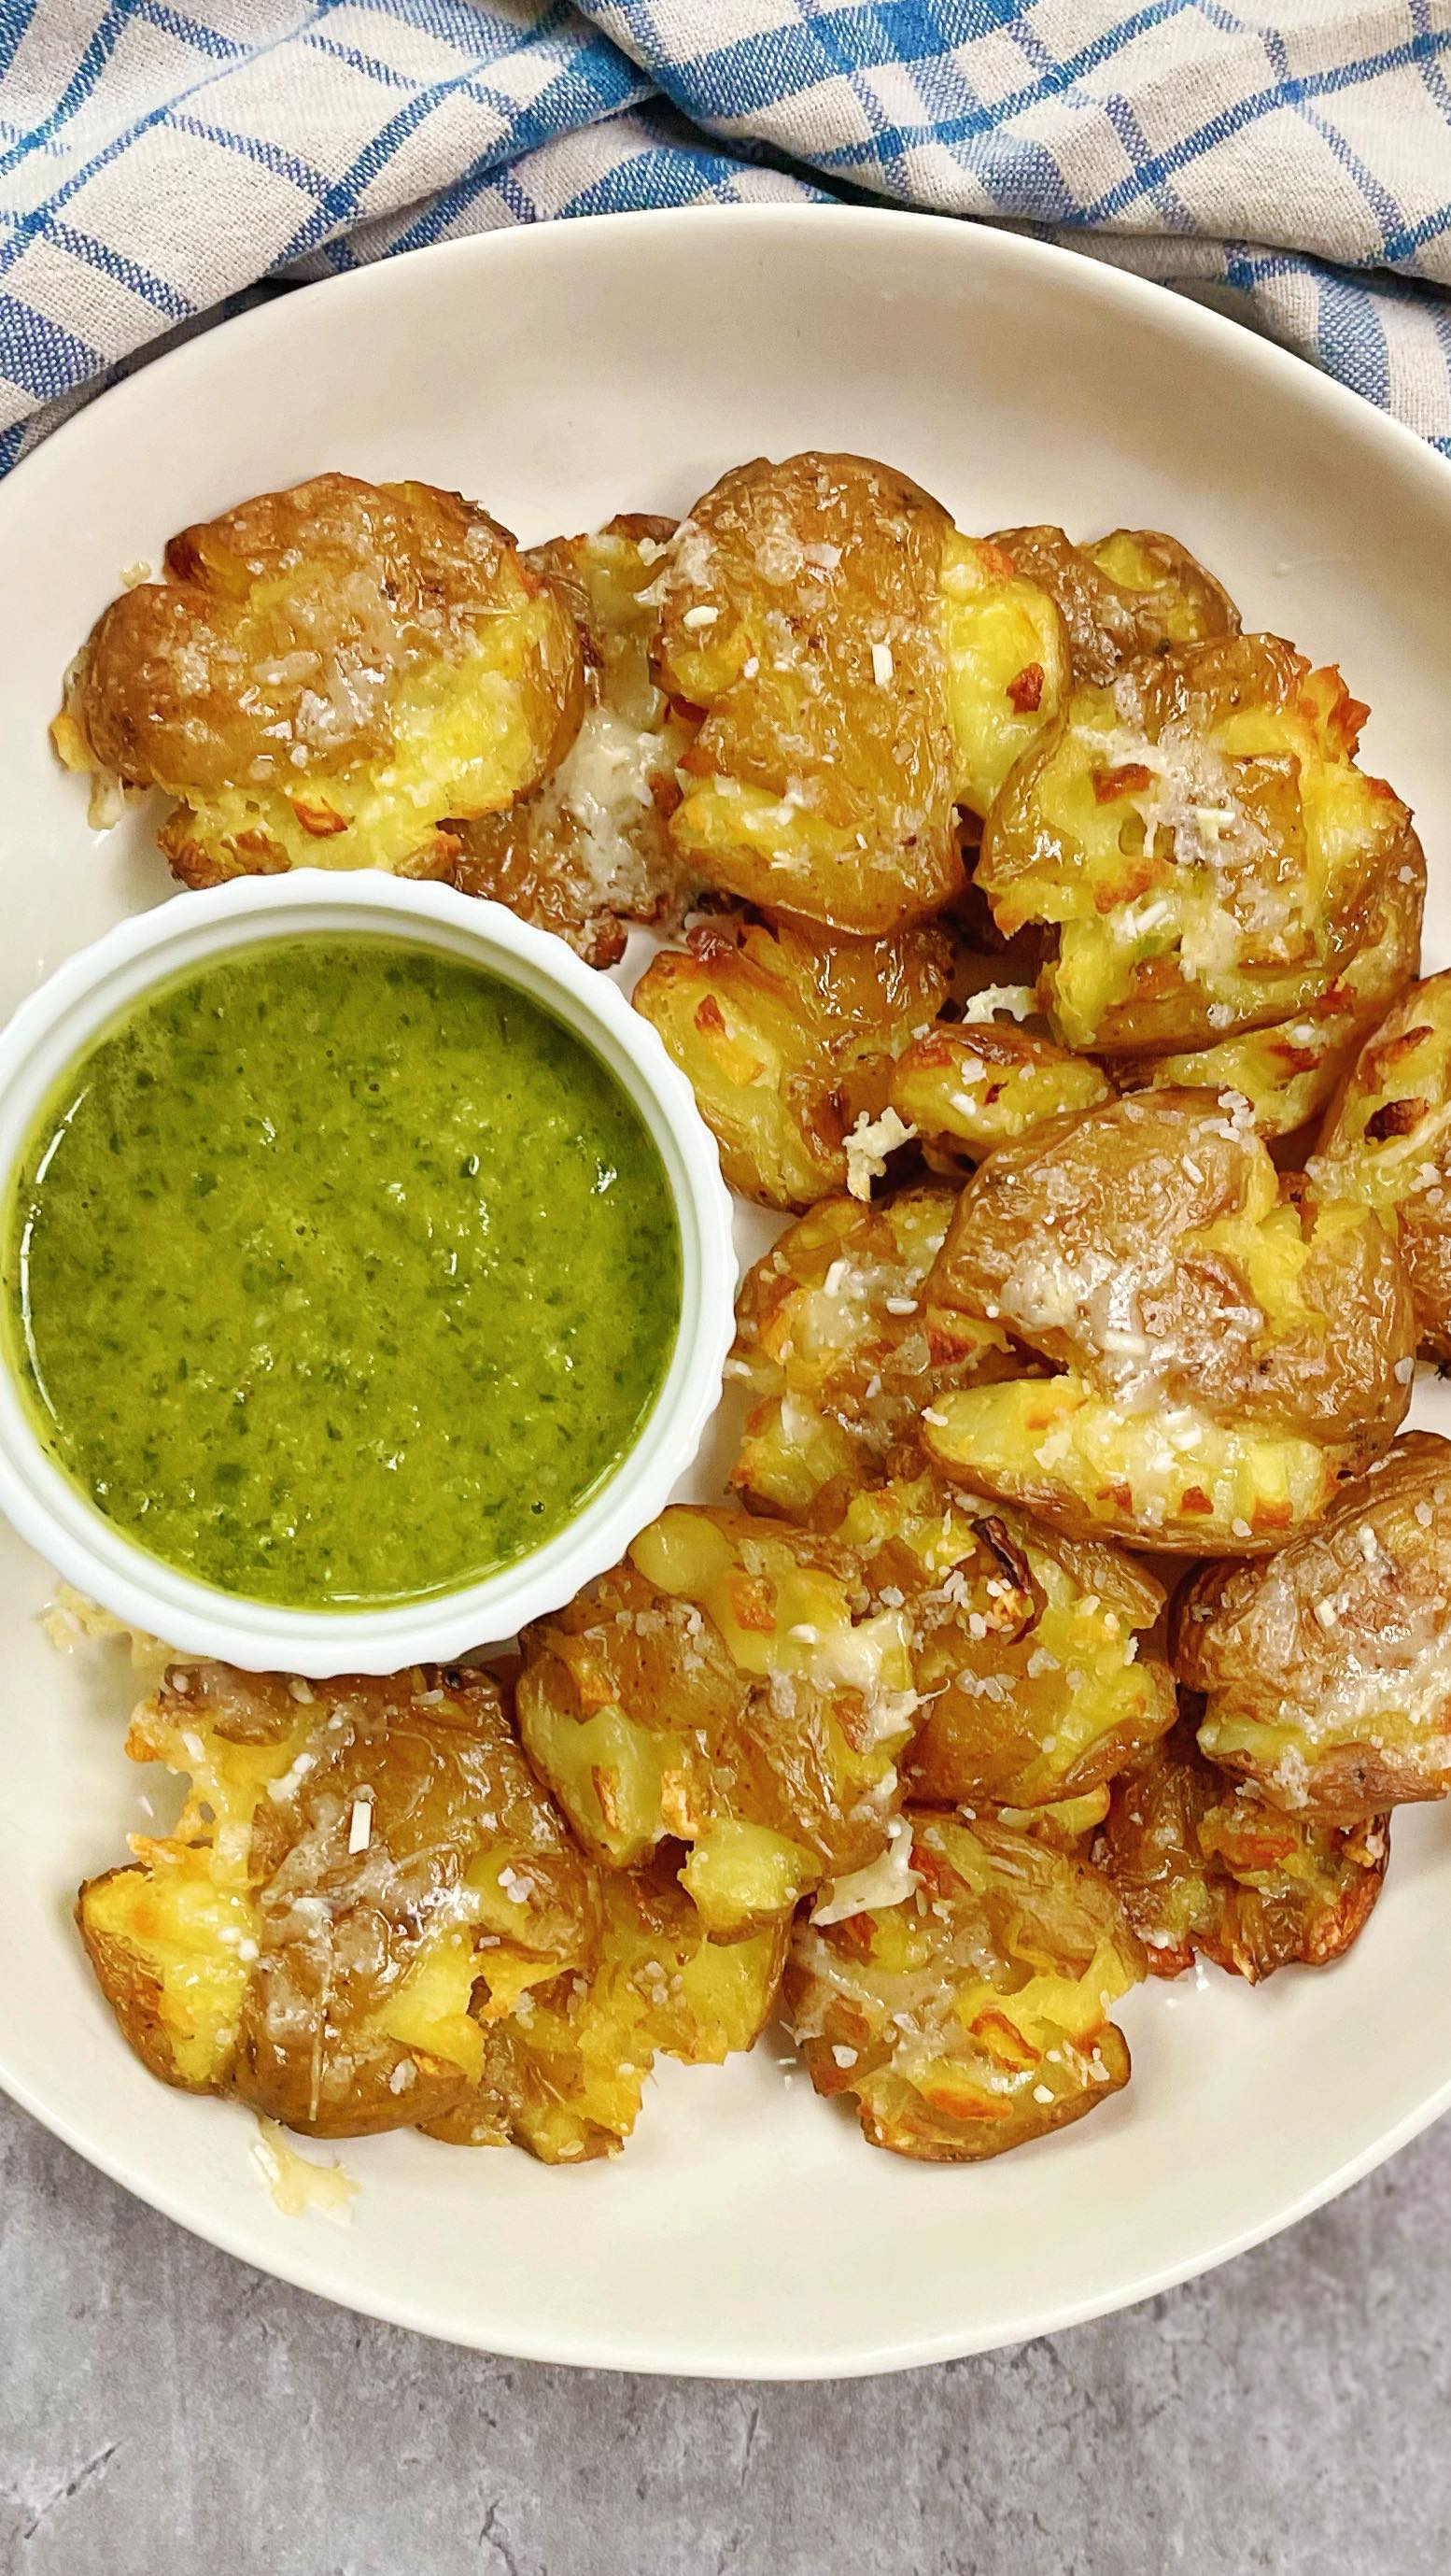 Follow @dinnerreinvented for more yummy recipes like these extra crispy smashed roasted petit potatoes. Crunchy skin, fluffy inside, salty and cheesy, need I say more? The recipe, along with the homemade chimichurri sauce, is now up on the DR site! #potatoes #mashedpotatoes #smashedpotatoes #roastedpotatoes #potatorecipes #easypotatorecipe #chimichurri #mothersday #brunchideas #easysidedish #dinnerreinvented